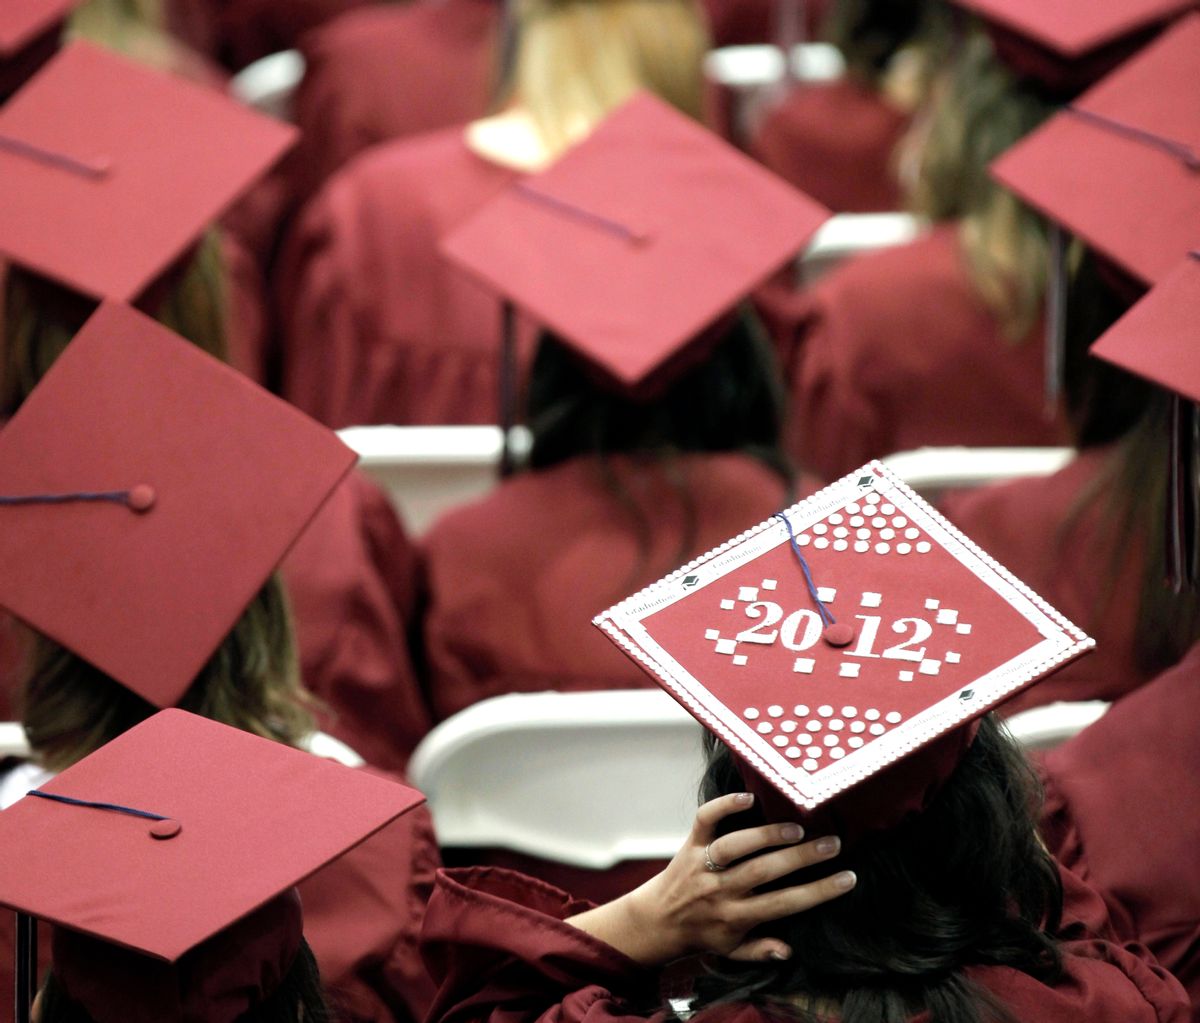 FILE - In this May 21, 2012, file photo, graduates from Joplin High School listen to speakers during commencement ceremonies in Joplin, Mo. U.S. public high schools have reached a milestone, an 80 percent graduation rate. Yet that still means 1 of every 5 students walks away without a diploma. Citing the progress, researchers are projecting a 90 percent national graduation rate by 2020.  (AP Photo/Charlie Riedel, File)